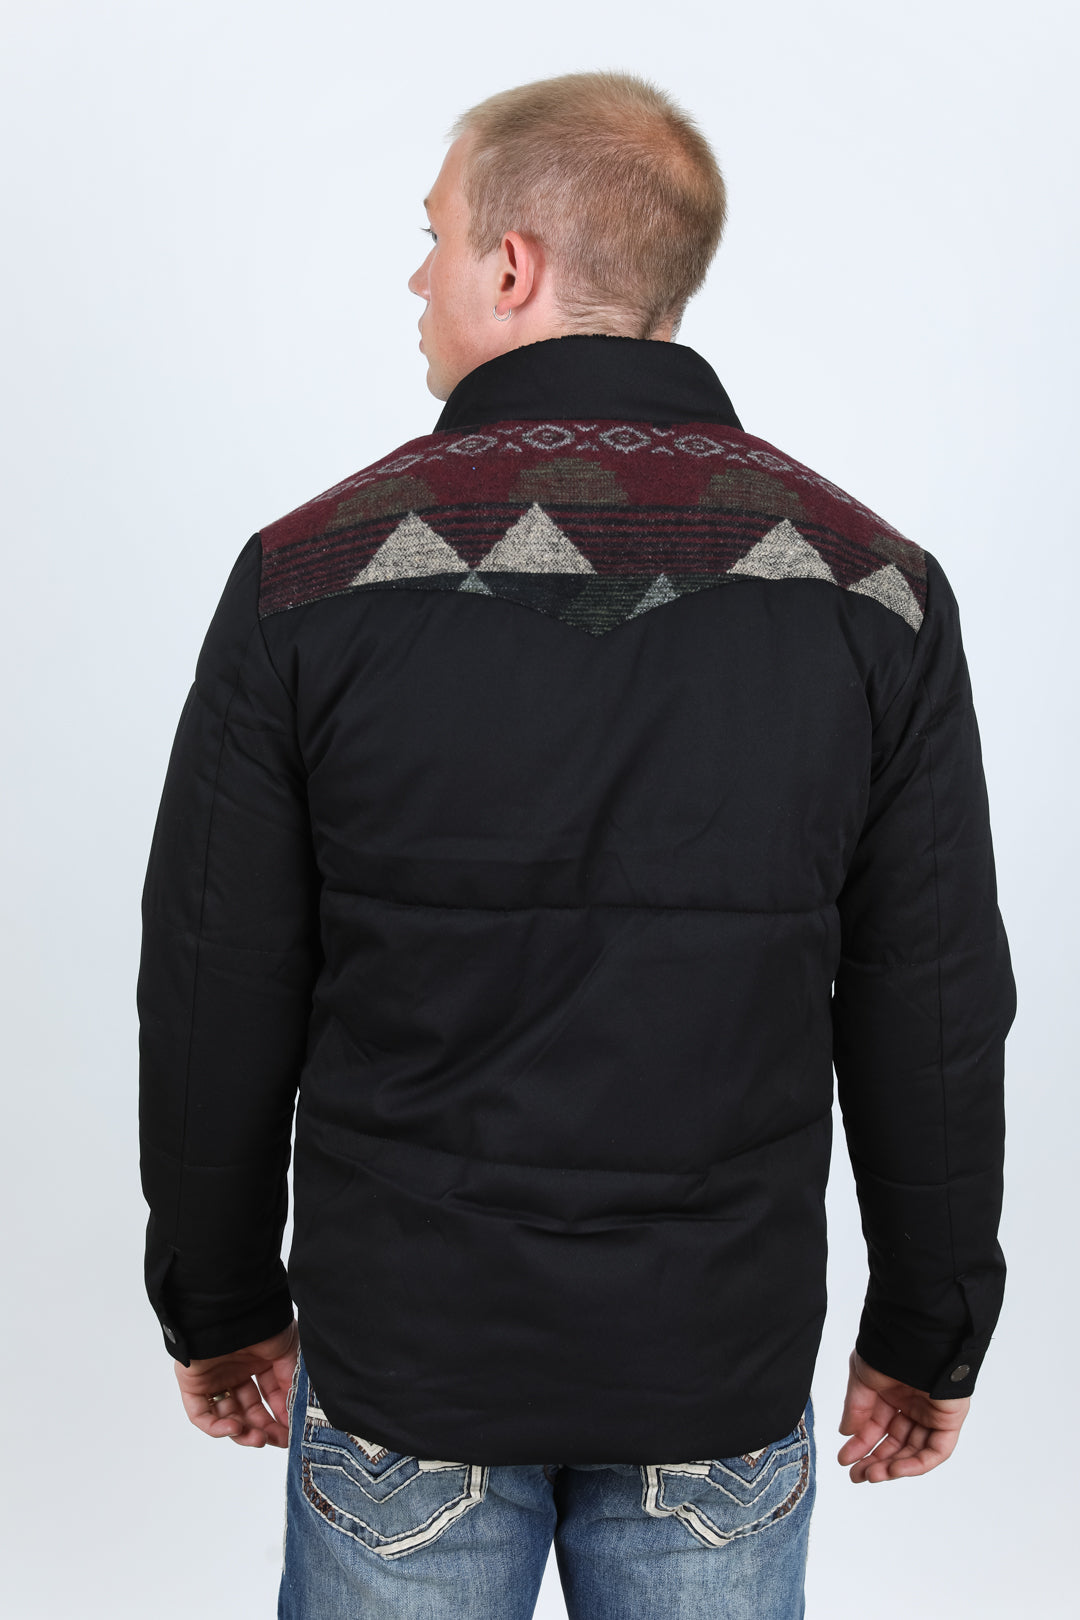 Men's Ethnic Aztec Quilted Fur Lined Twill Jacket - Black